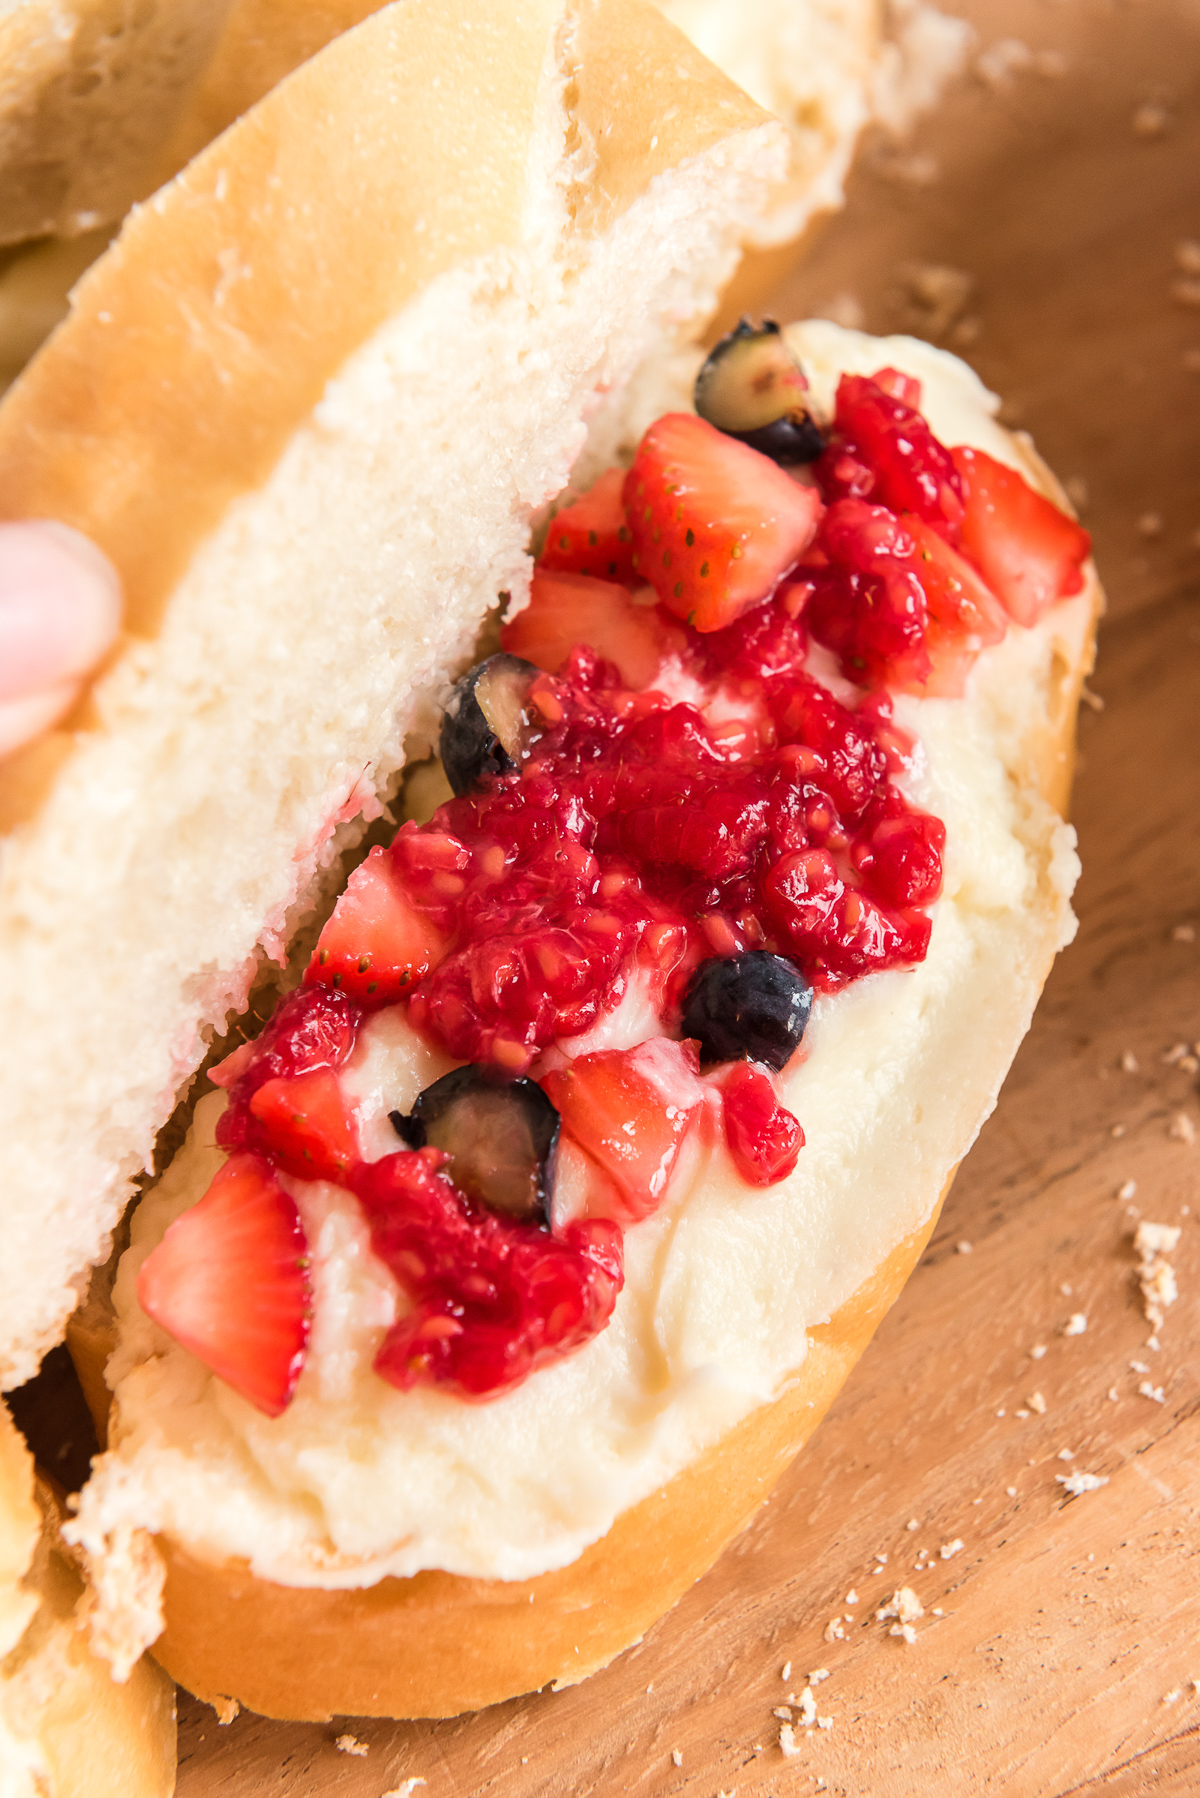 Macerated berries and mascaprone cheese filling on french bread slices.